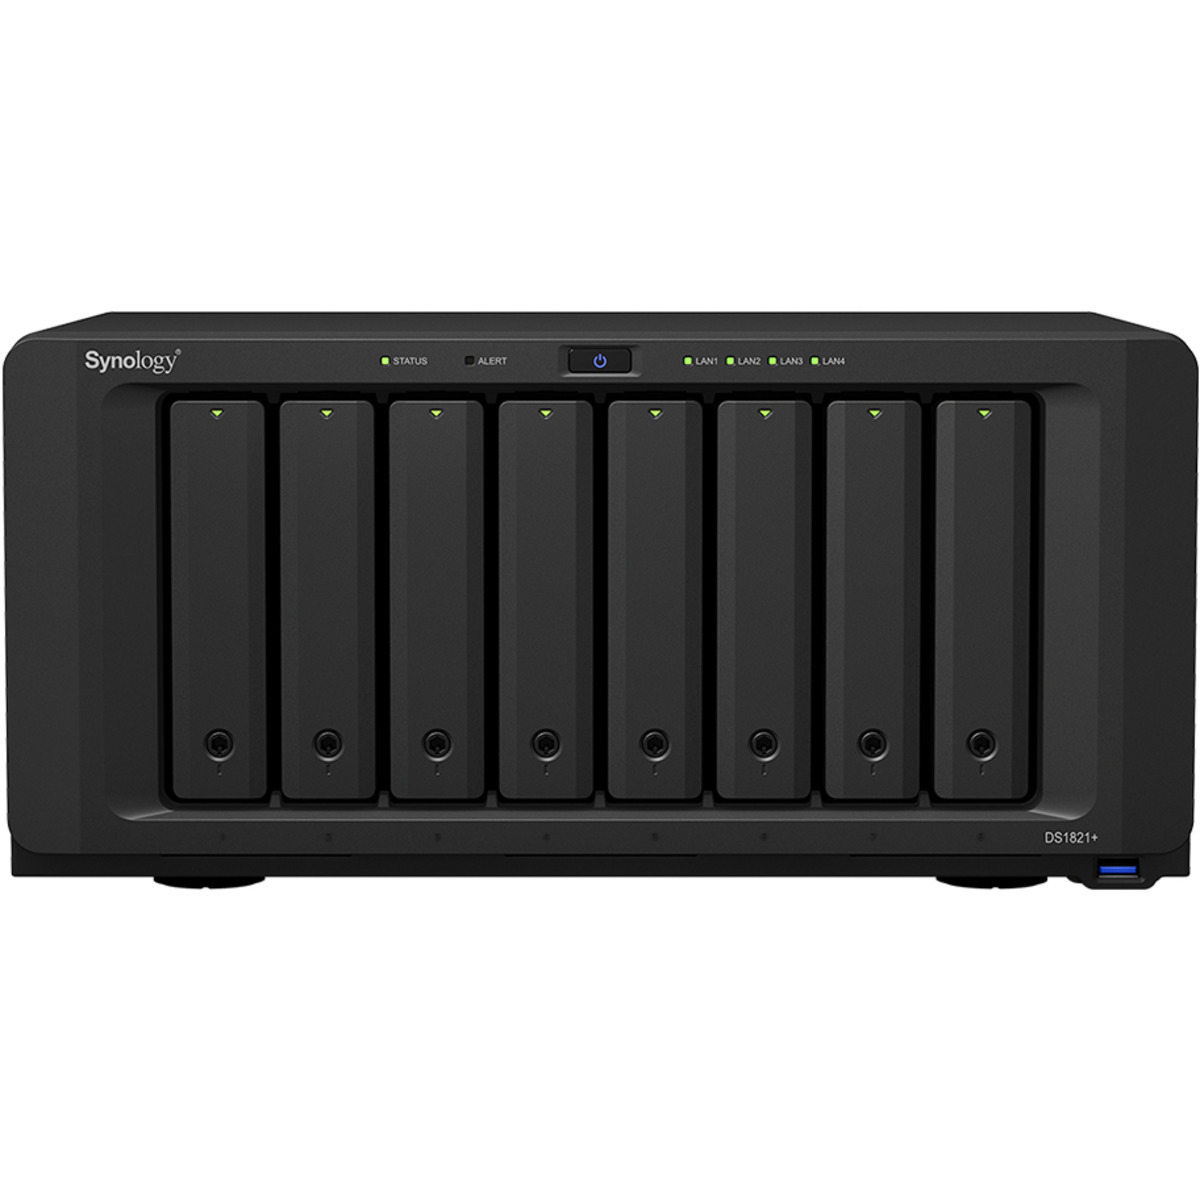 Synology DiskStation DS1821+ 32tb 8-Bay Desktop Multimedia / Power User / Business NAS - Network Attached Storage Device 8x4tb Seagate EXOS 7E10 ST4000NM024B 3.5 7200rpm SATA 6Gb/s HDD ENTERPRISE Class Drives Installed - Burn-In Tested - FREE RAM UPGRADE DiskStation DS1821+